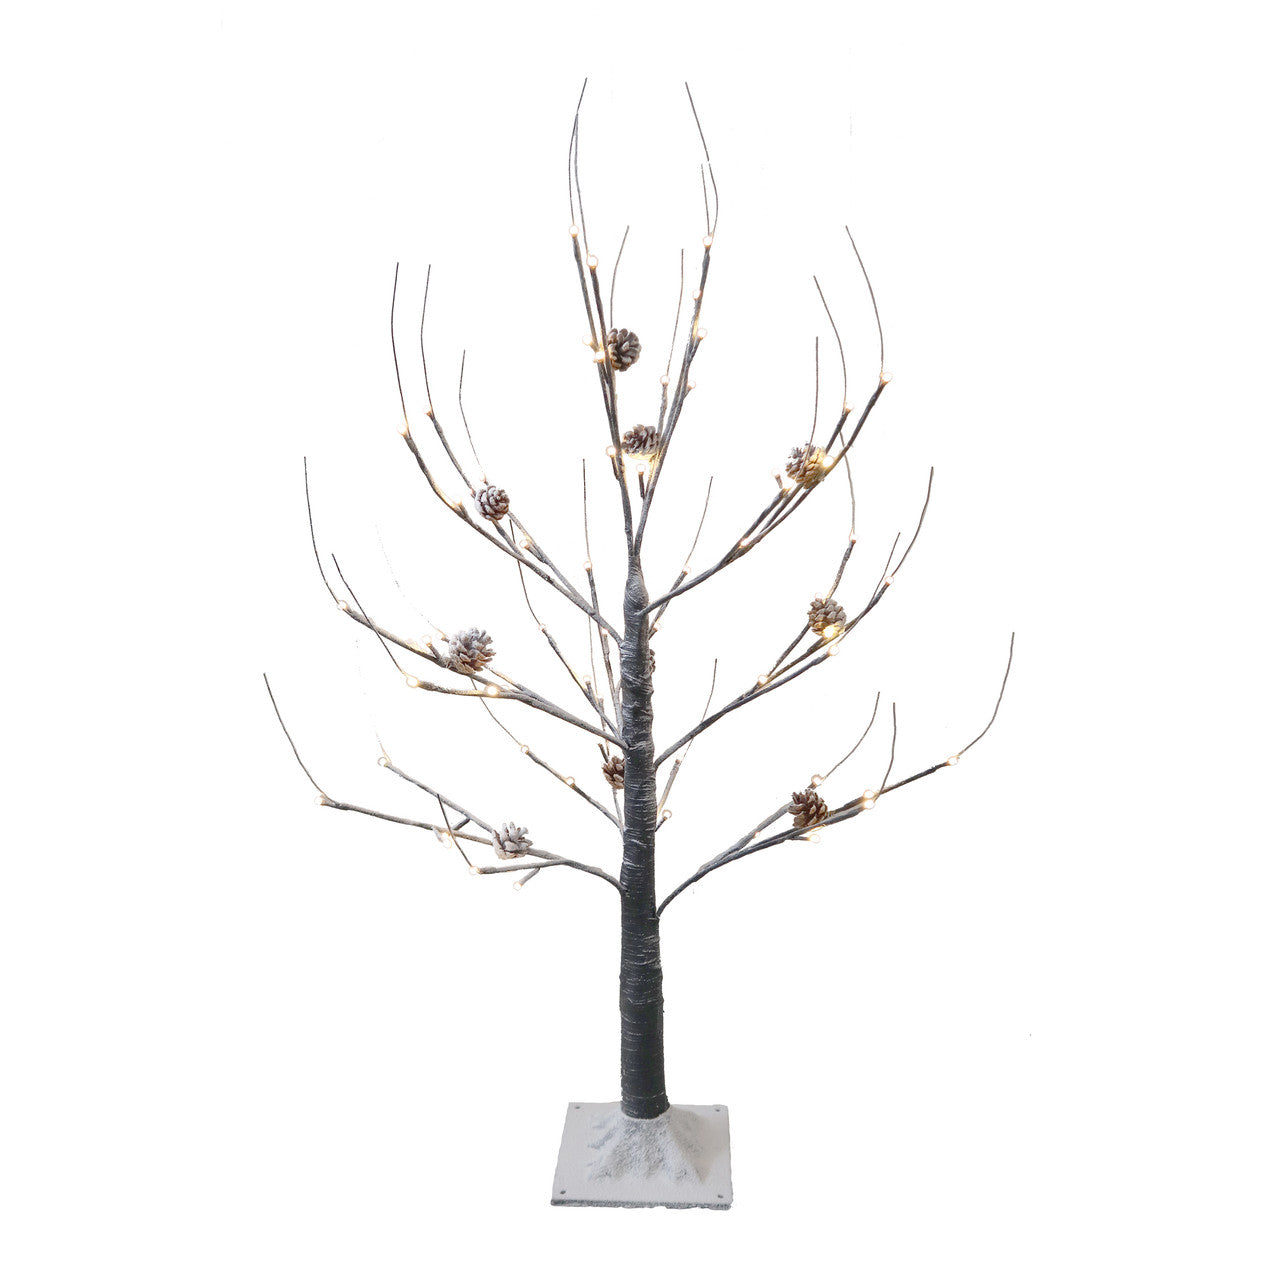 Kurt S Adler 3 Ft Warm White Led Flocked Brown Twig Tree with Pinecones